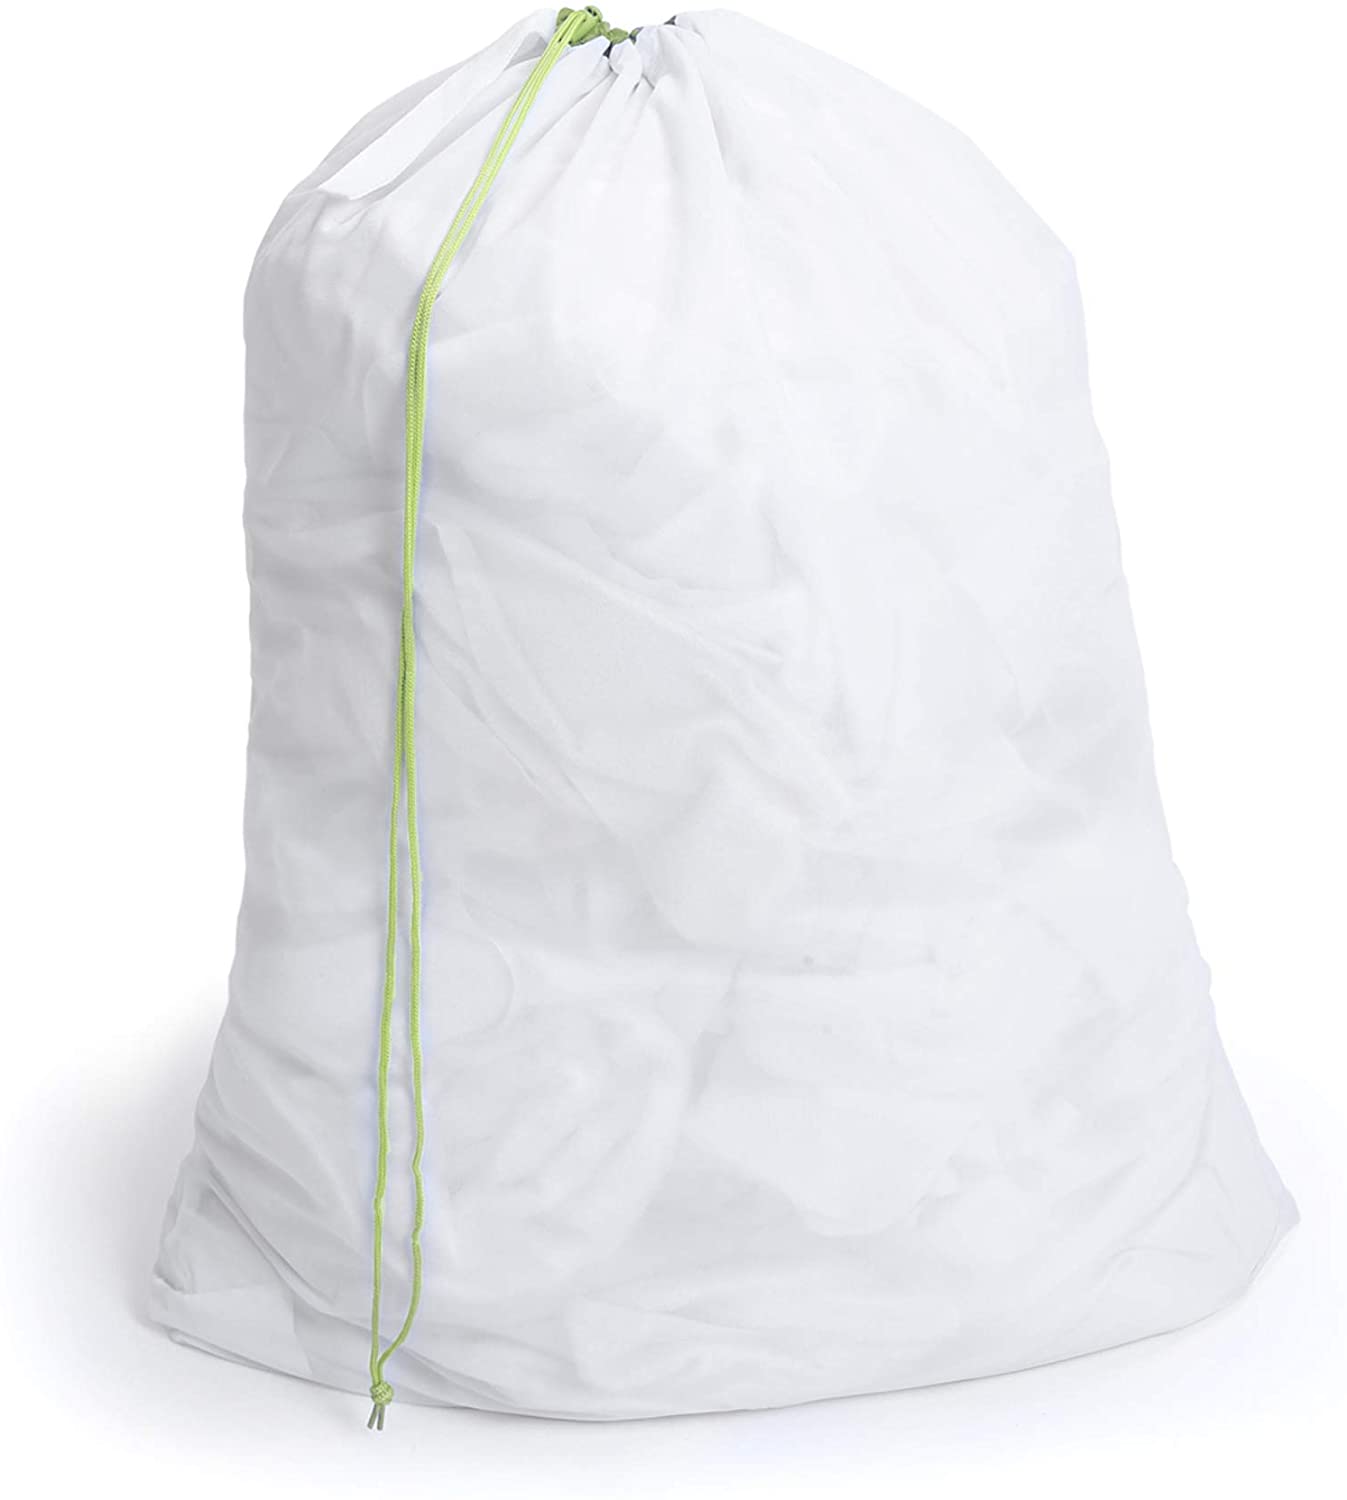 Mesh Laundry Bag with Handle and Push Lock Drawstring - Multiple Options - Smart Design® 25